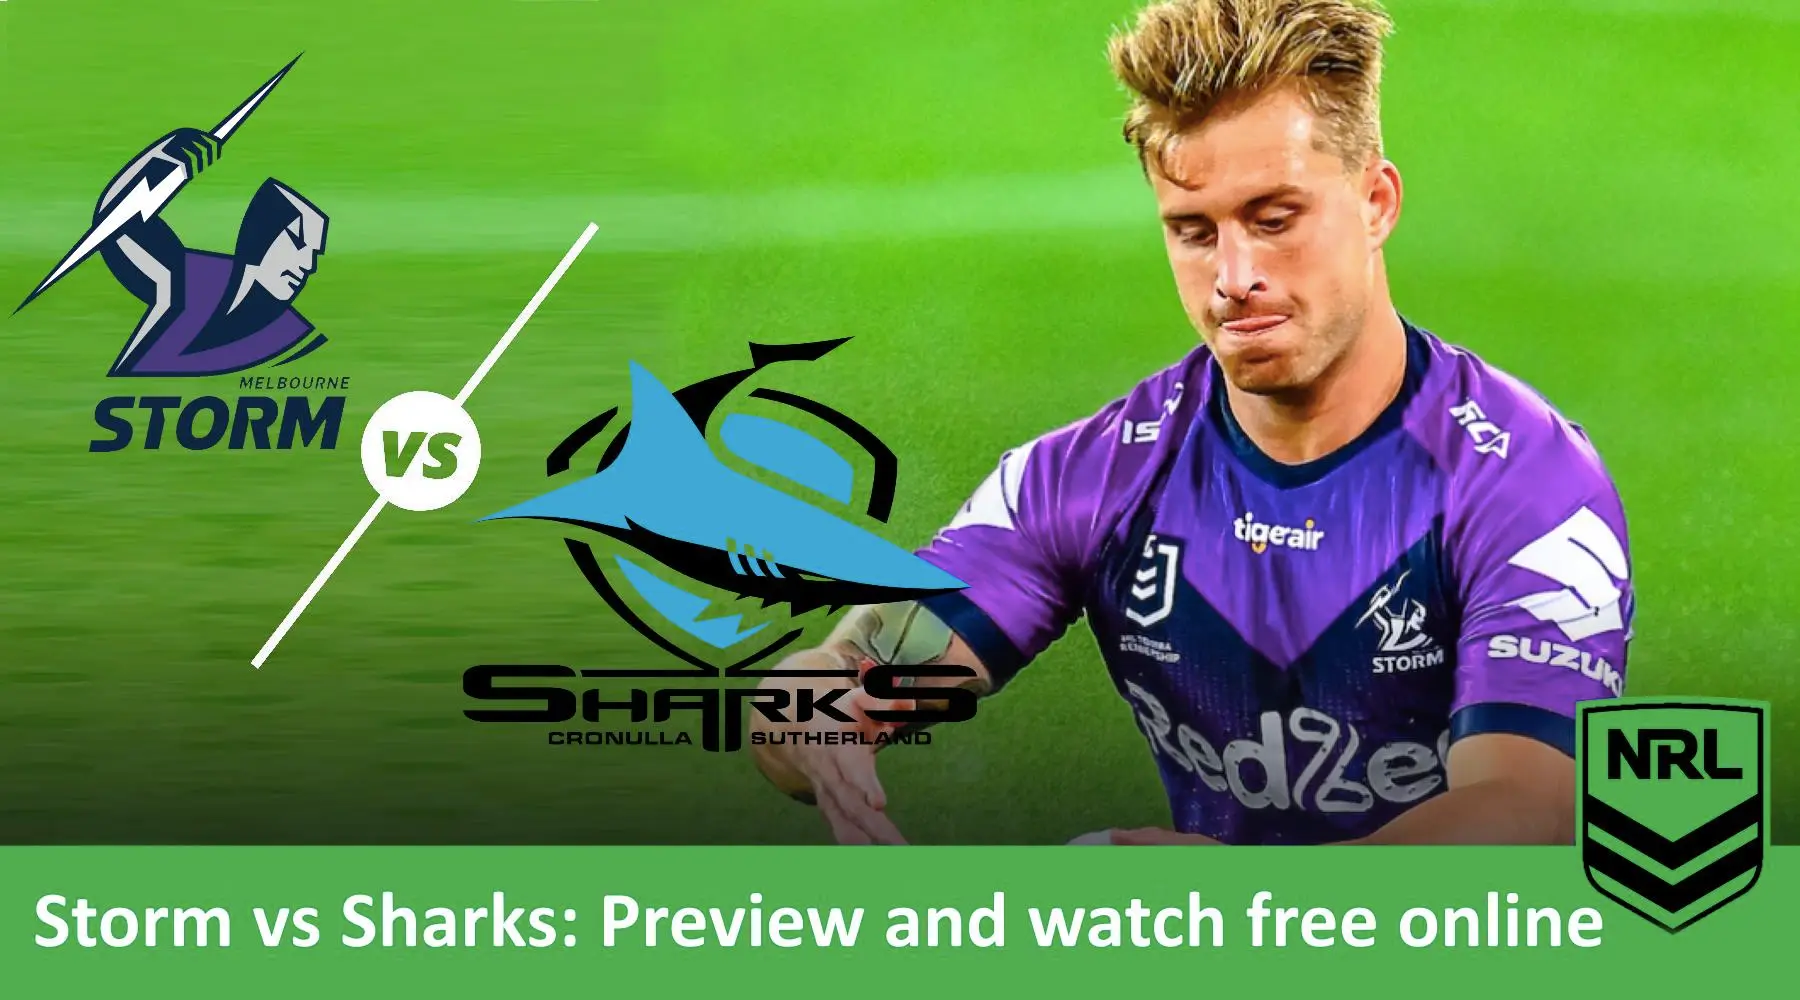 How to watch Storm vs Sharks NRL live and match preview